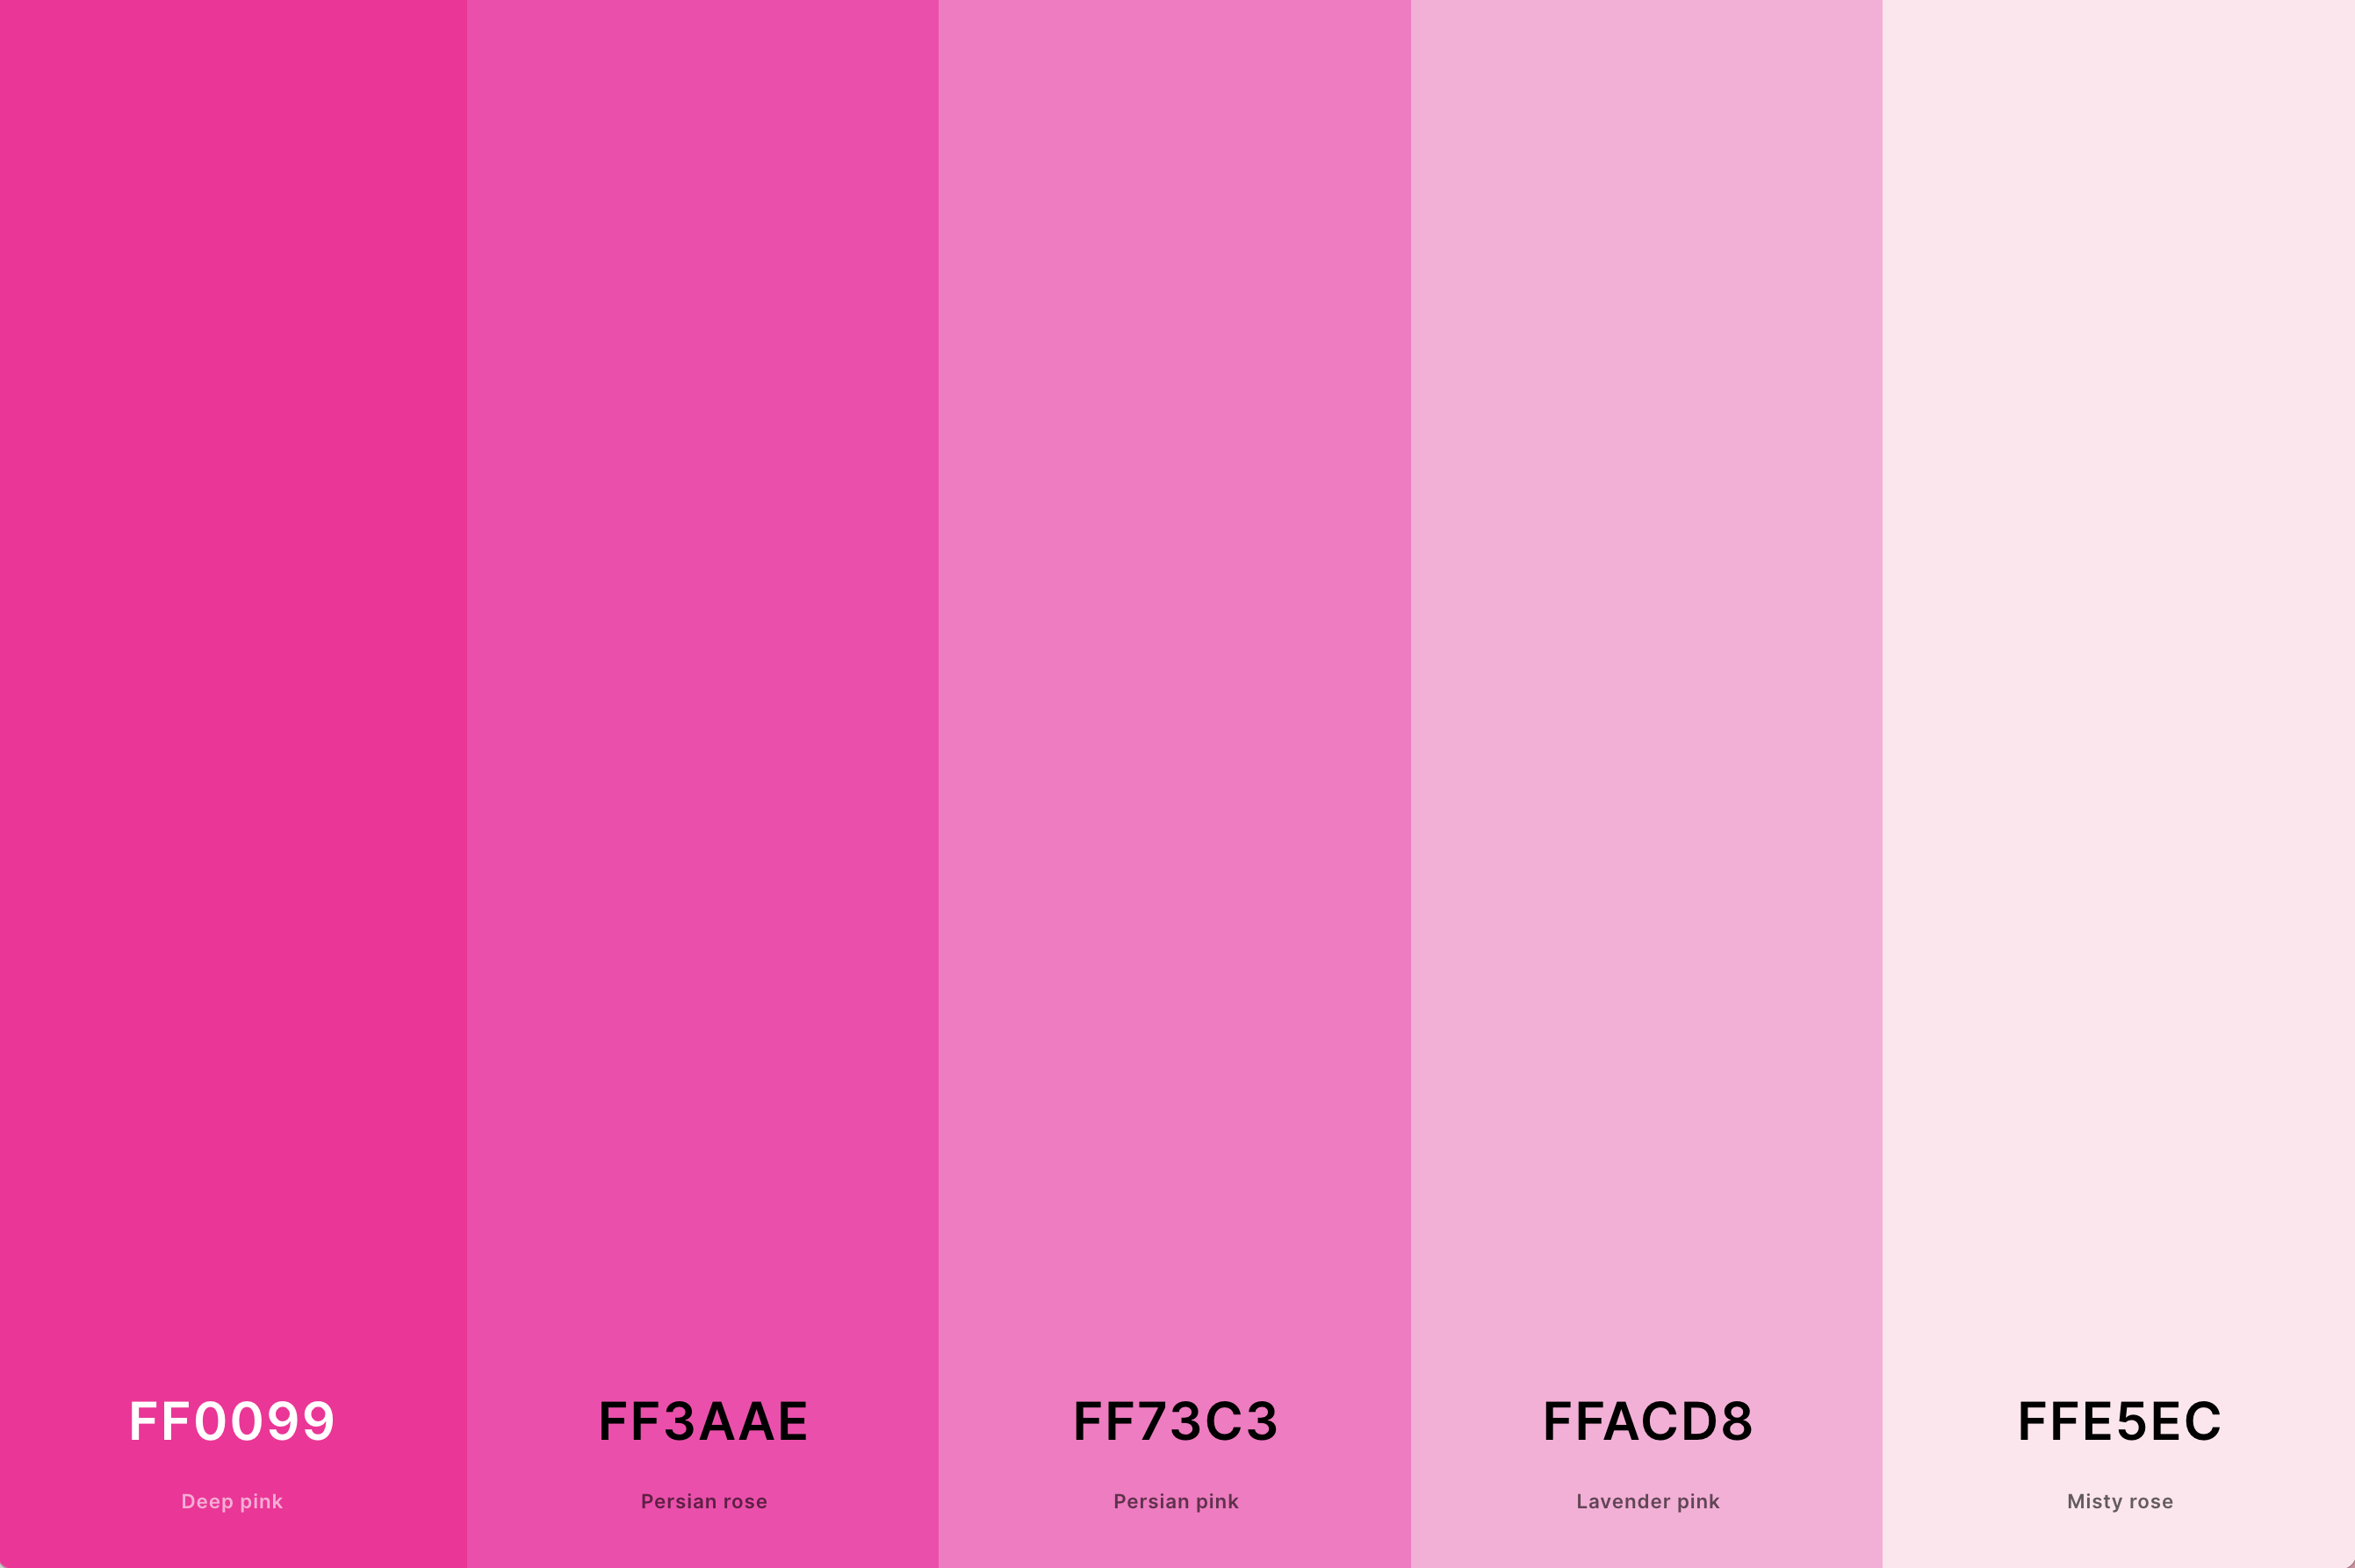 23. Shades Pink Color Palette Color Palette with Deep Pink (Hex #FF0099) + Persian Rose (Hex #FF3AAE) + Persian Pink (Hex #FF73C3) + Lavender Pink (Hex #FFACD8) + Misty Rose (Hex #FFE5EC) Color Palette with Hex Codes